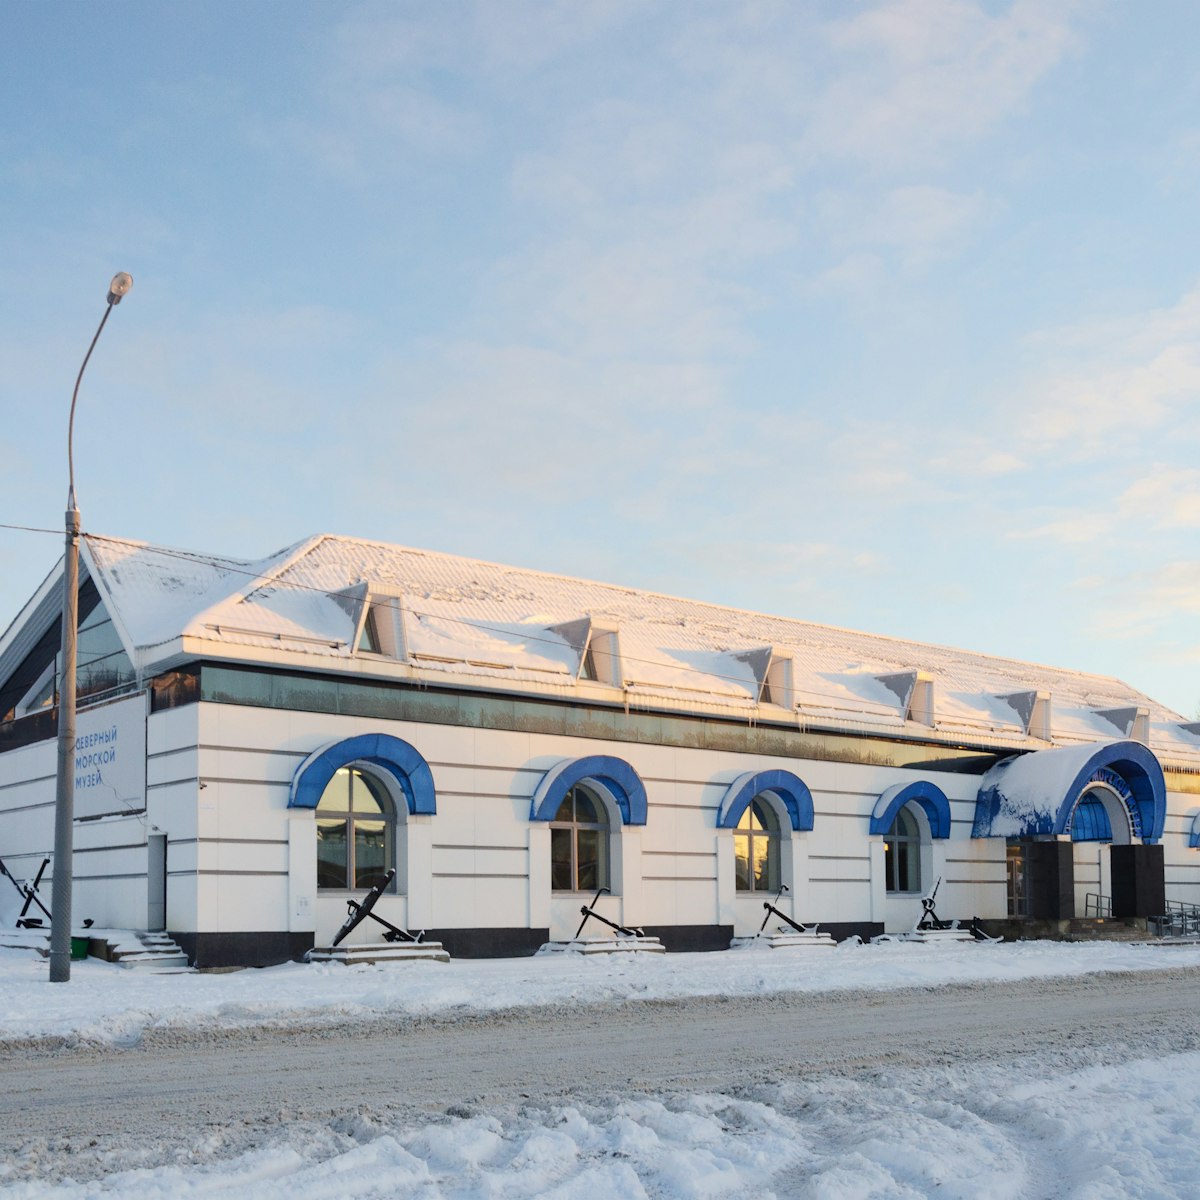 The Northern Maritime Museum in Arkhangelsk, Russia.